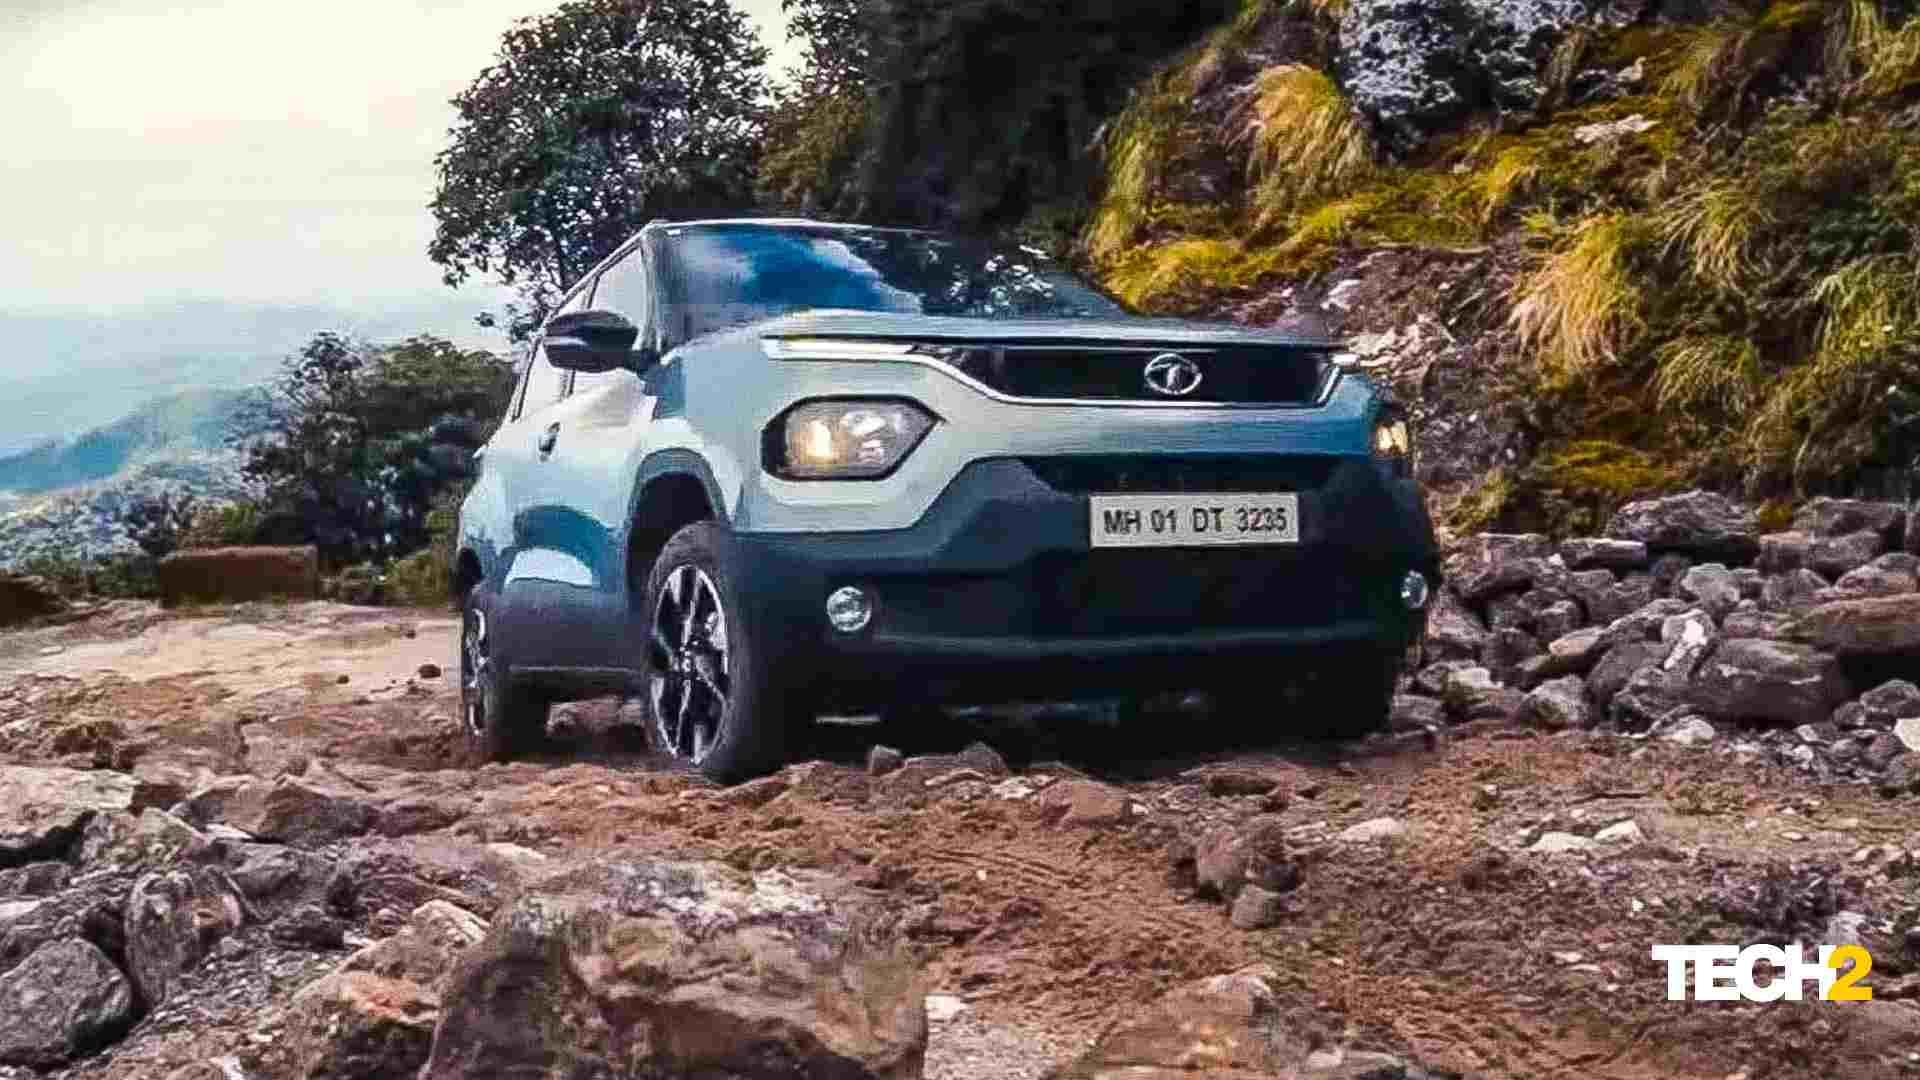 Not a hatchback': Why Tata Motors is going out of its way to establish the Punch as a true SUV- Technology News, Firstpost